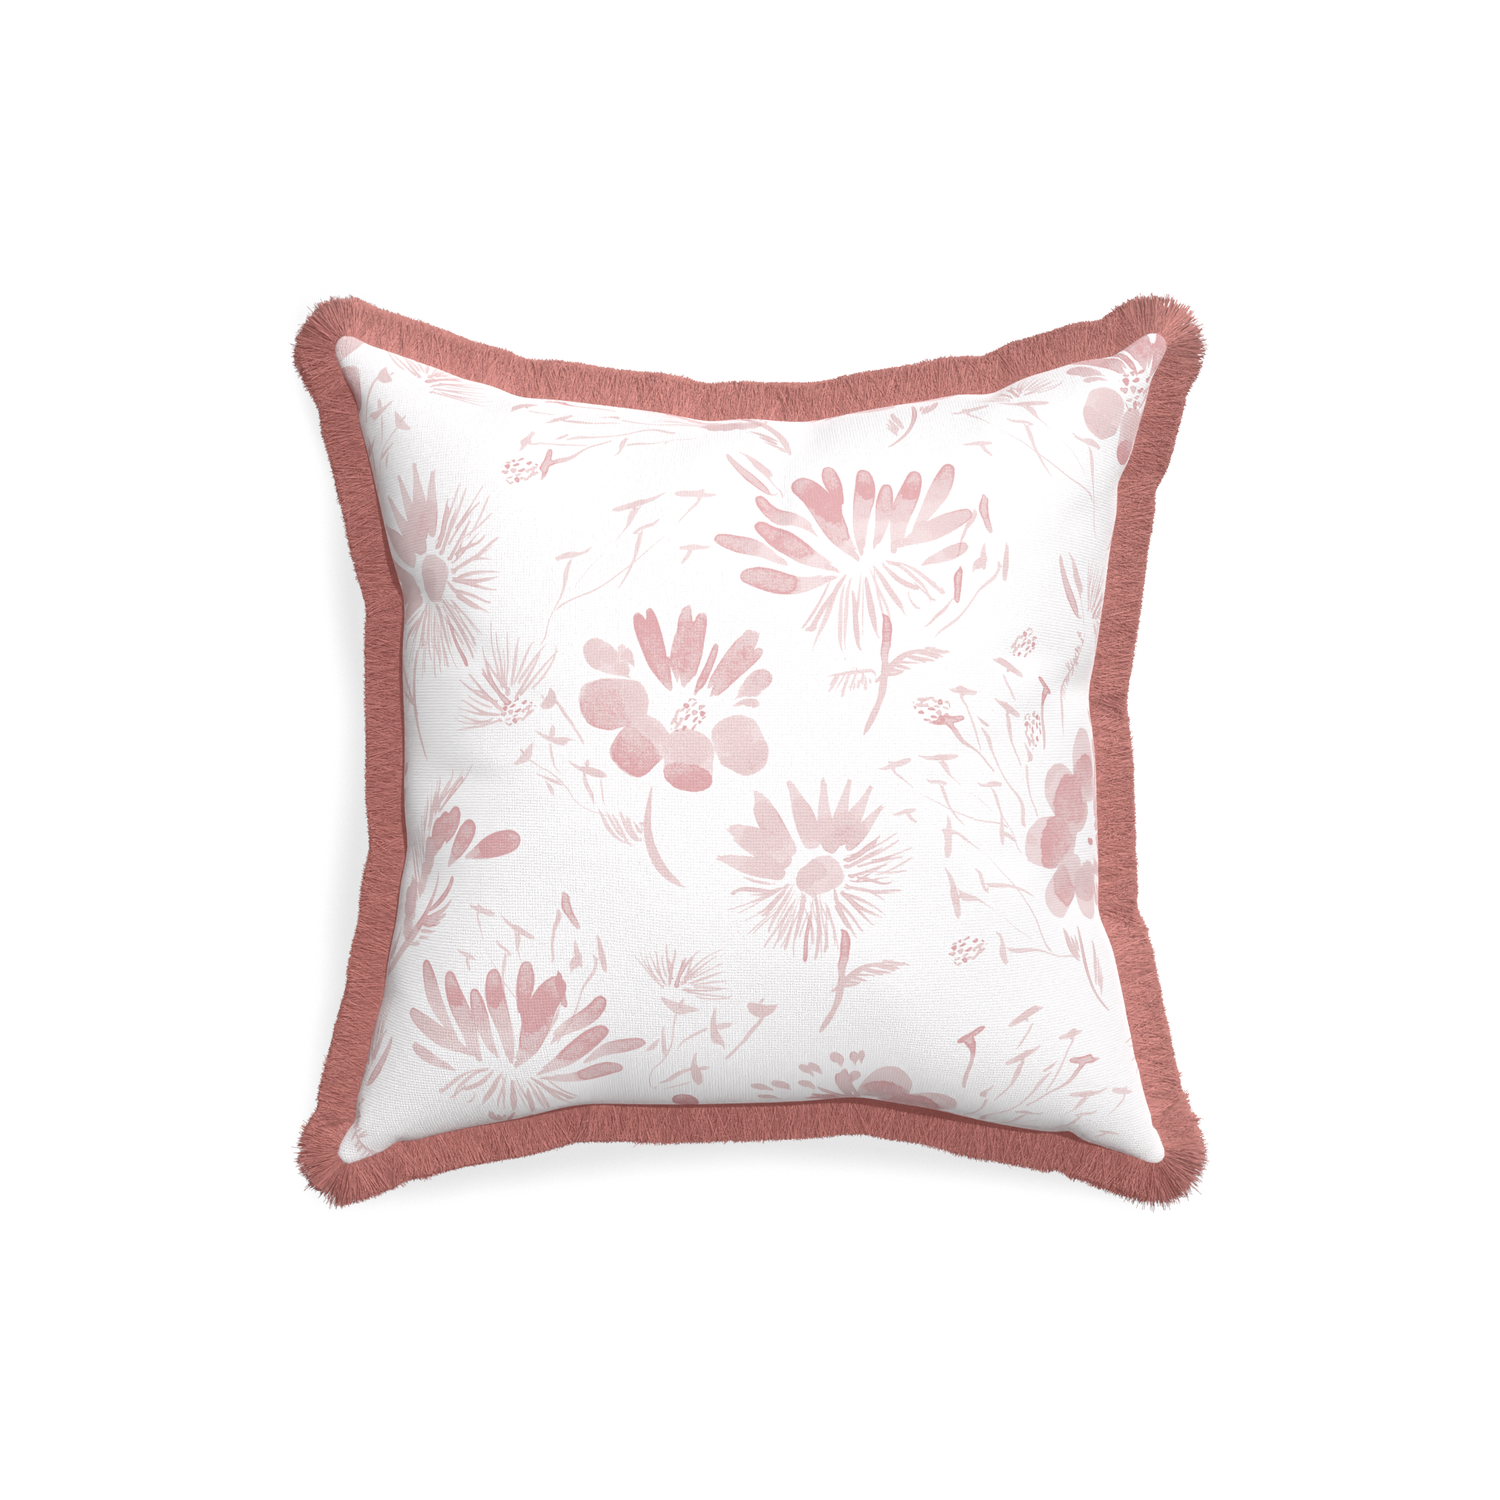 18-square blake custom pink floralpillow with d fringe on white background